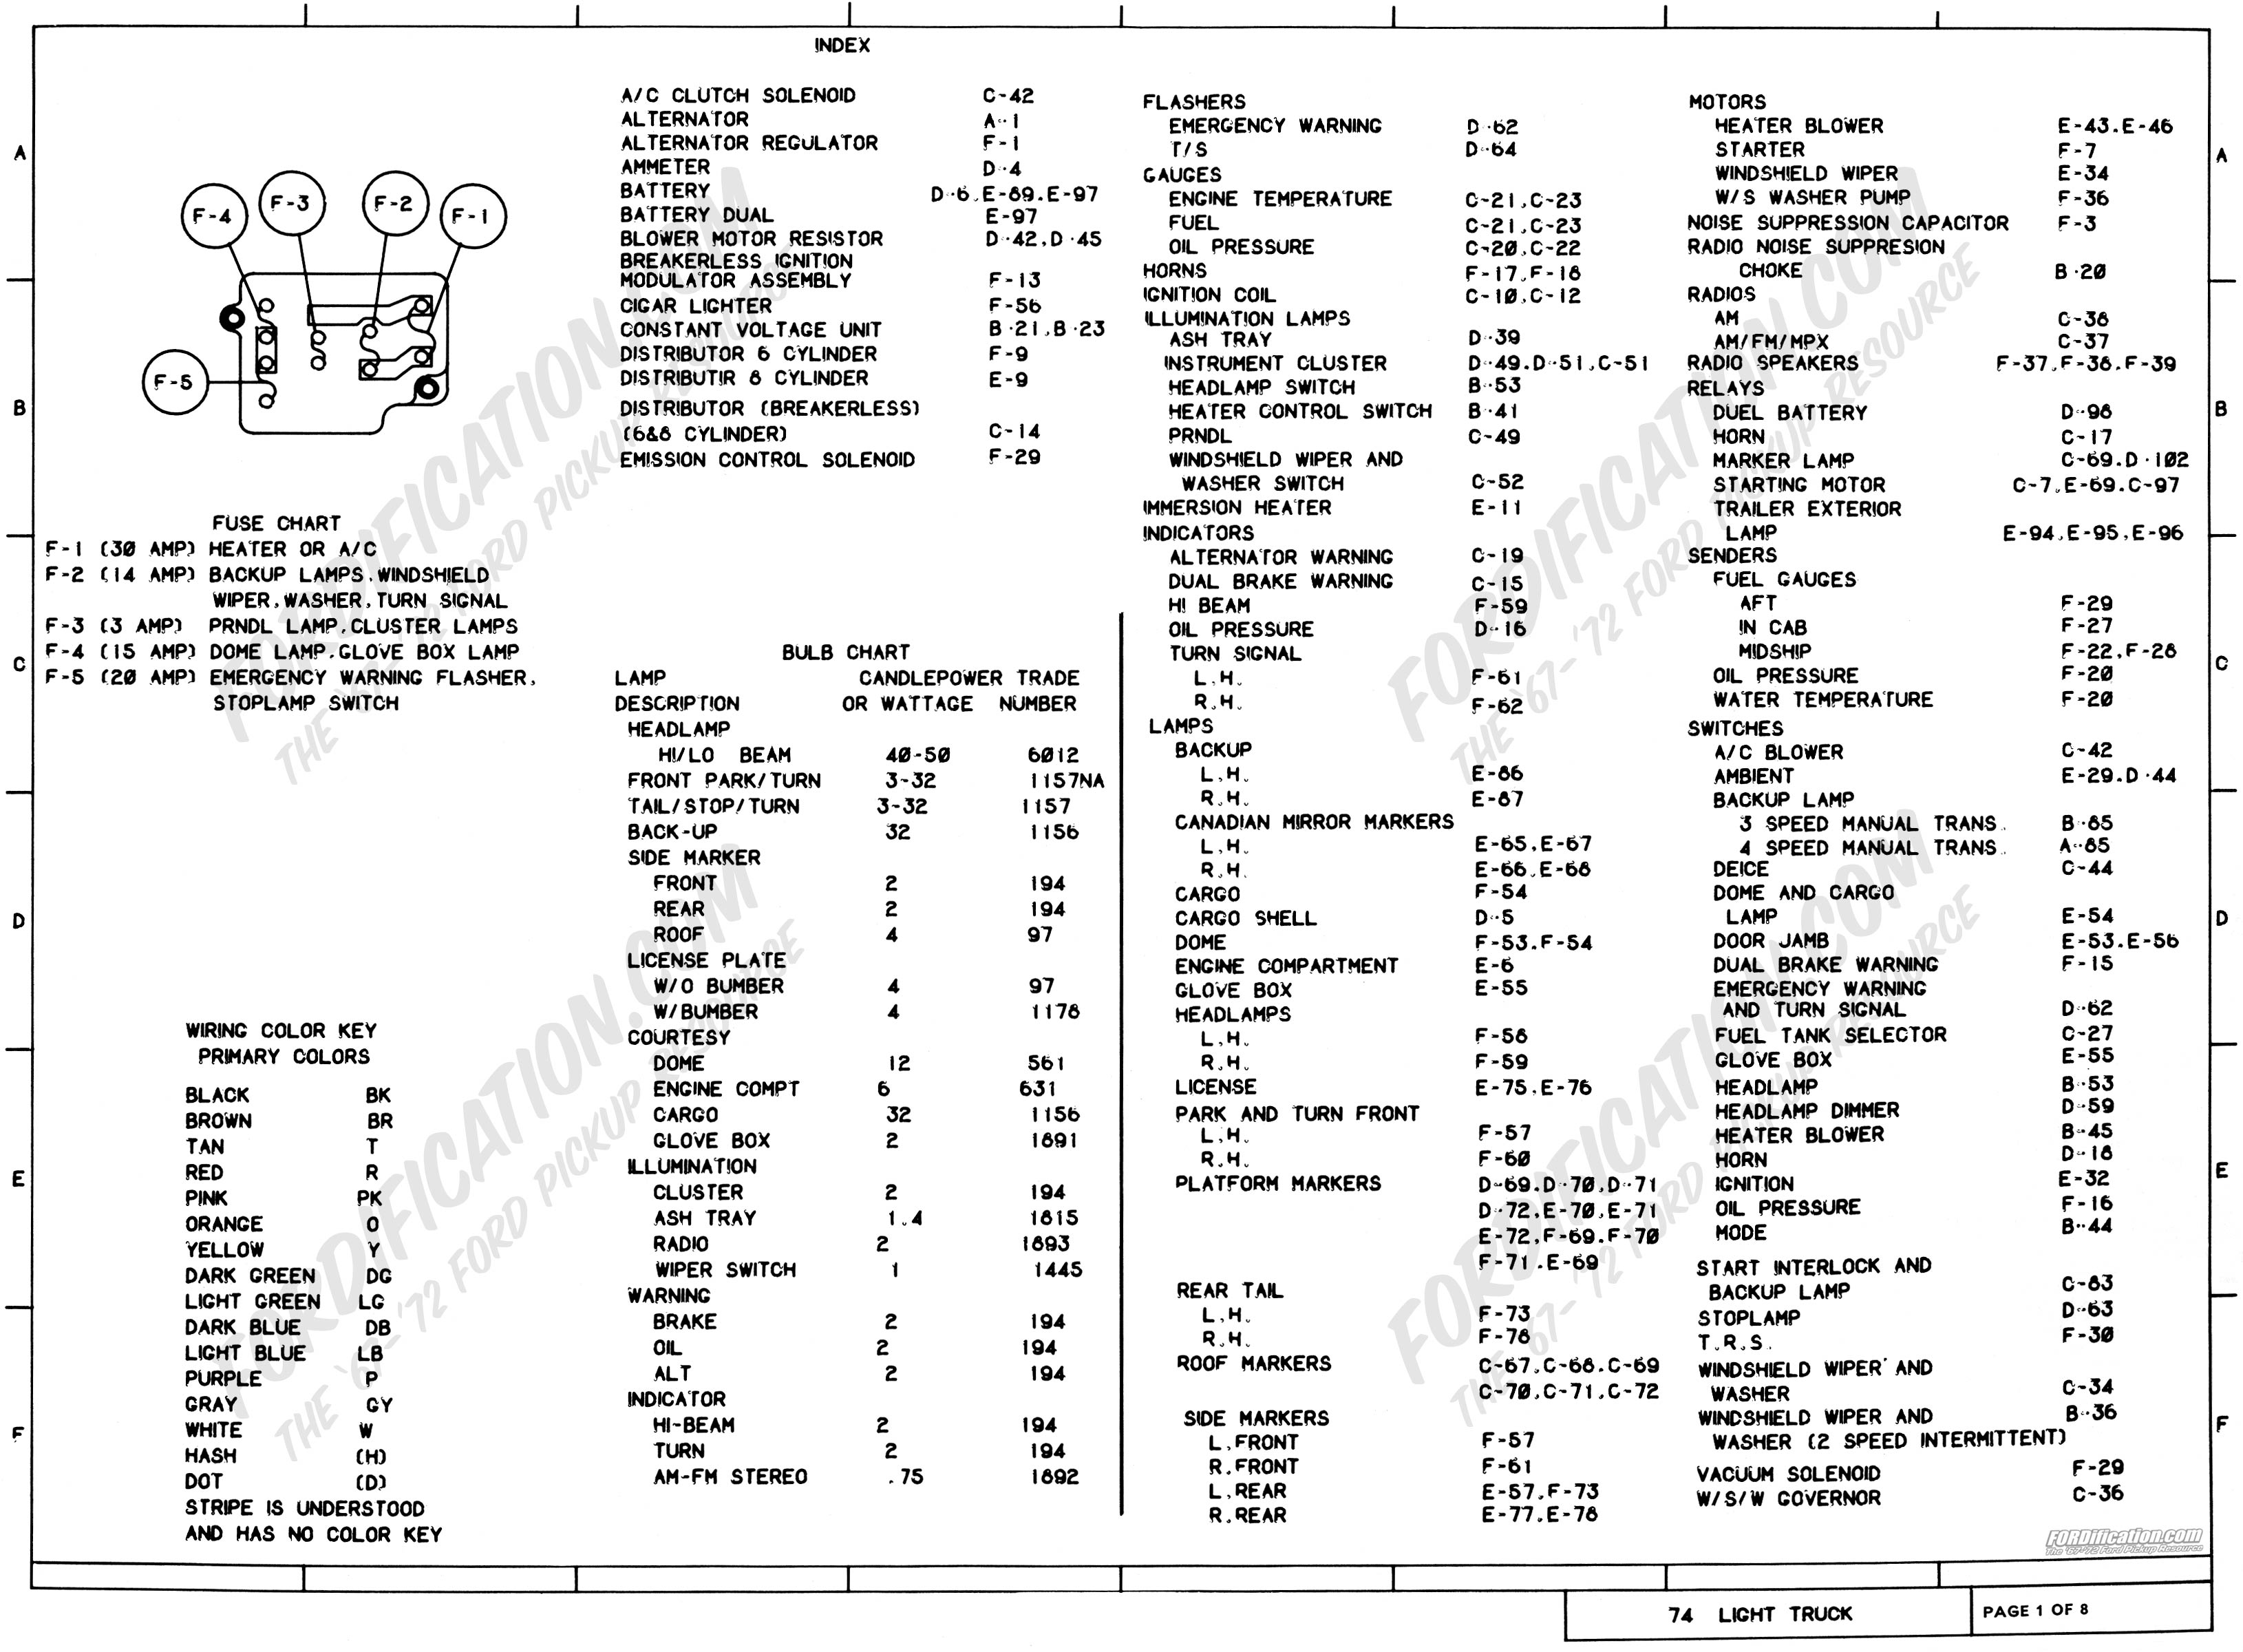 Wiring diagram for 1973 ford f100 #8